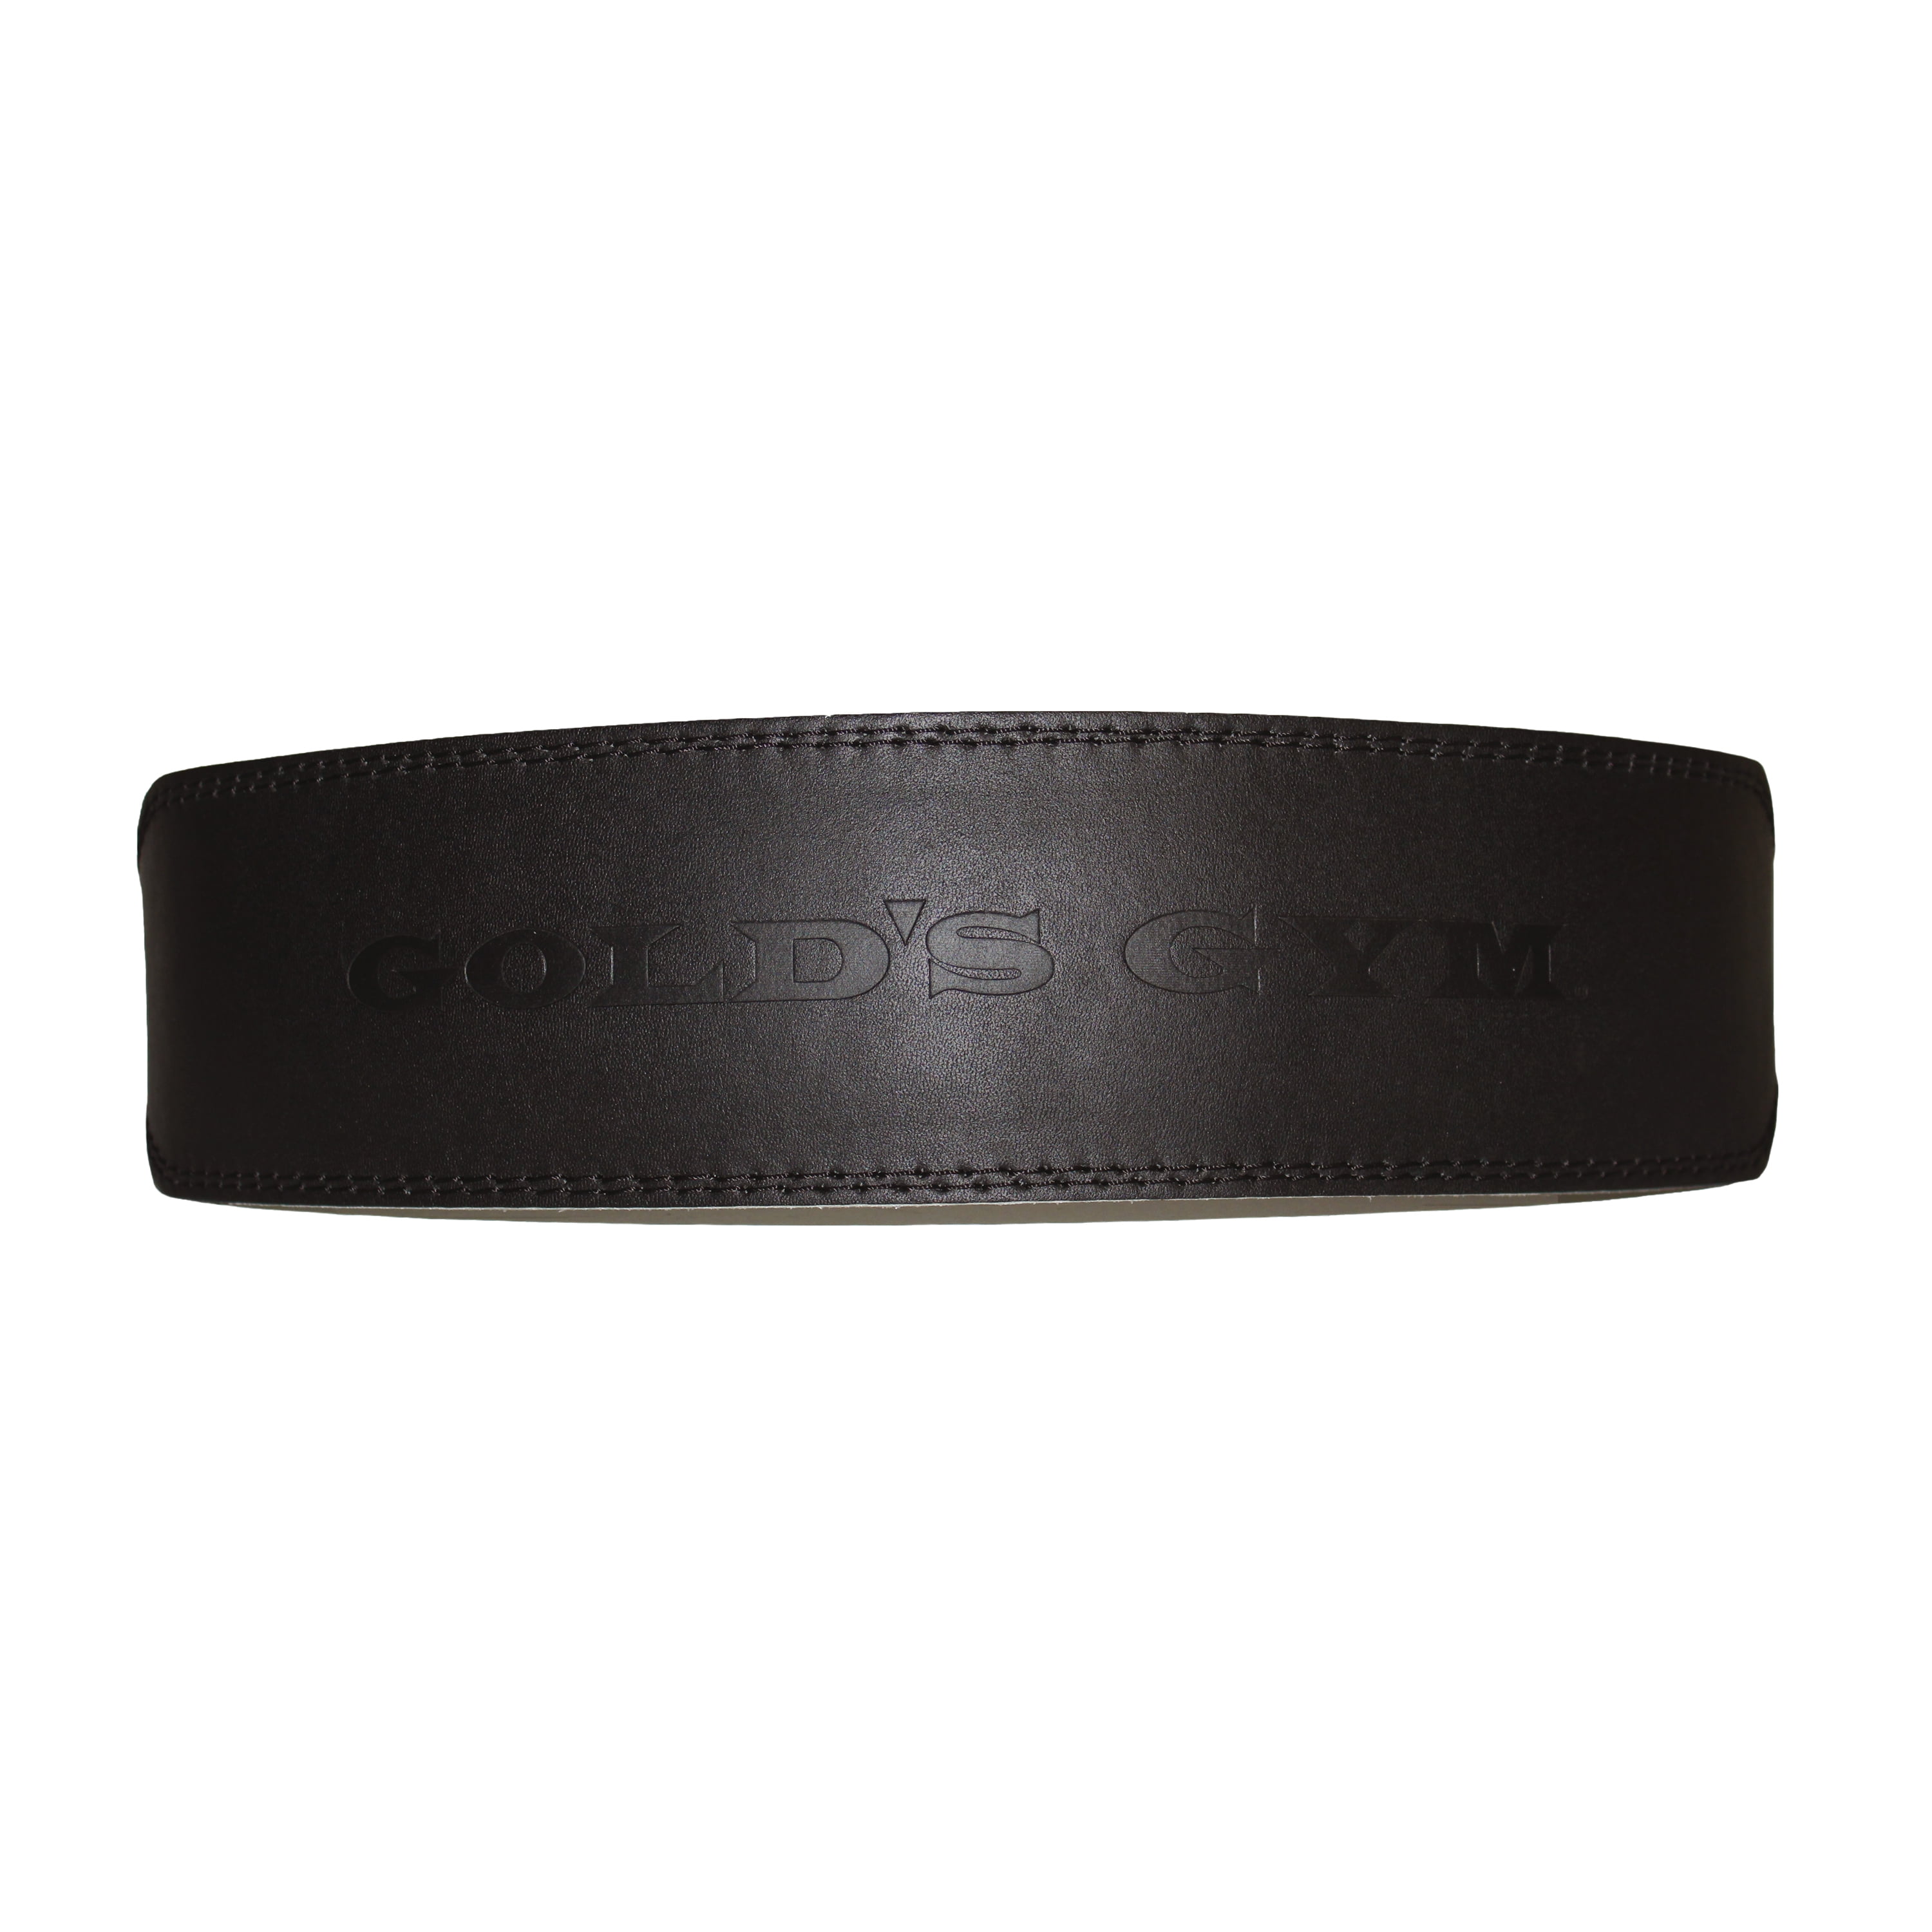 Golds Gym Weight Lifting Belt Deluxe 4” Nylon Lumbar Back Support Power Training 